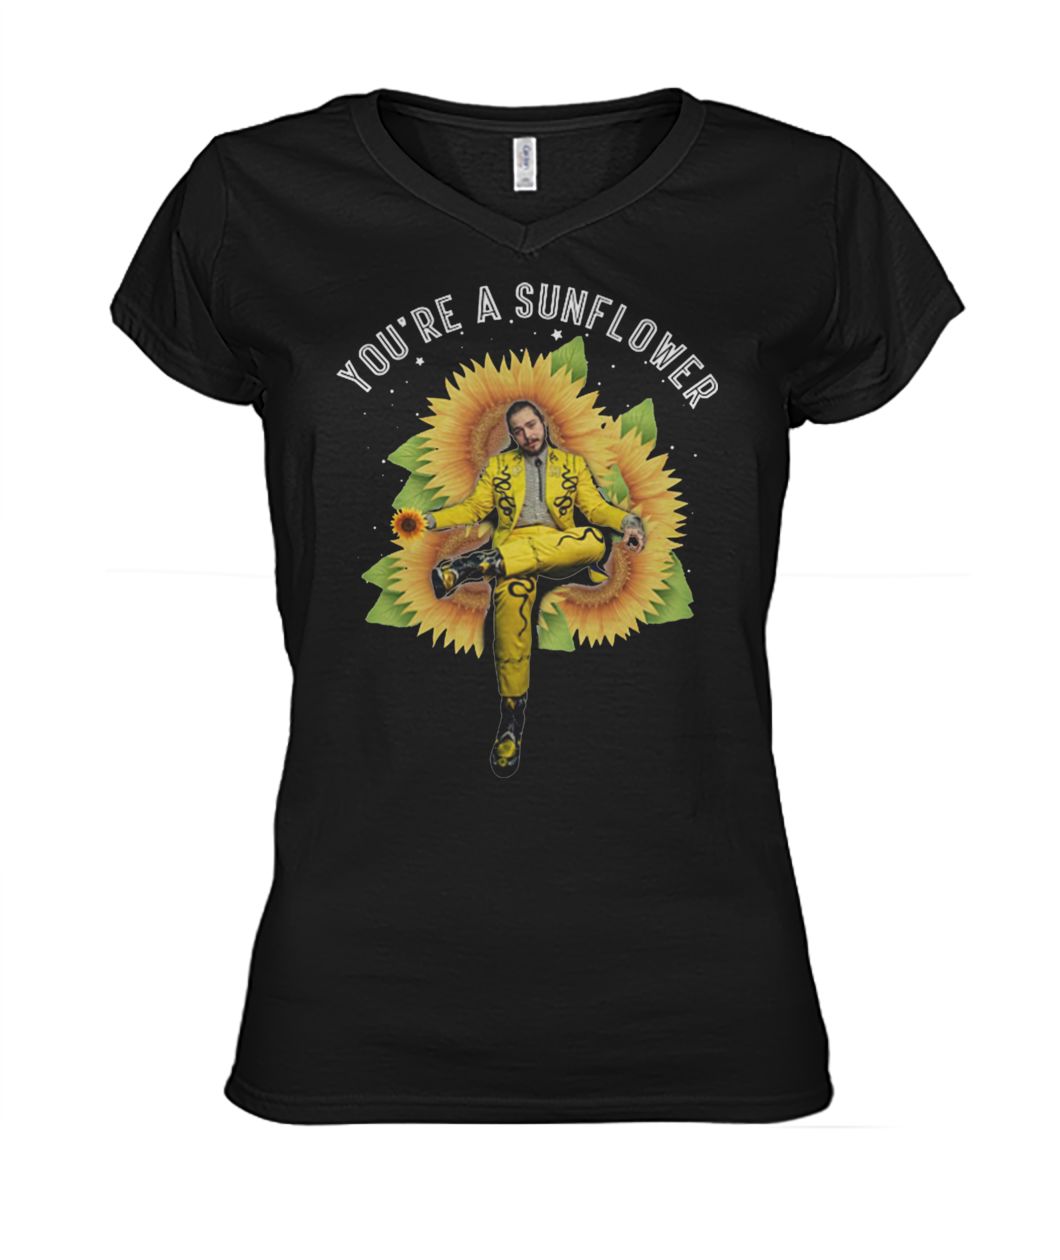 Post Malone you're a sunflower women's v-neck